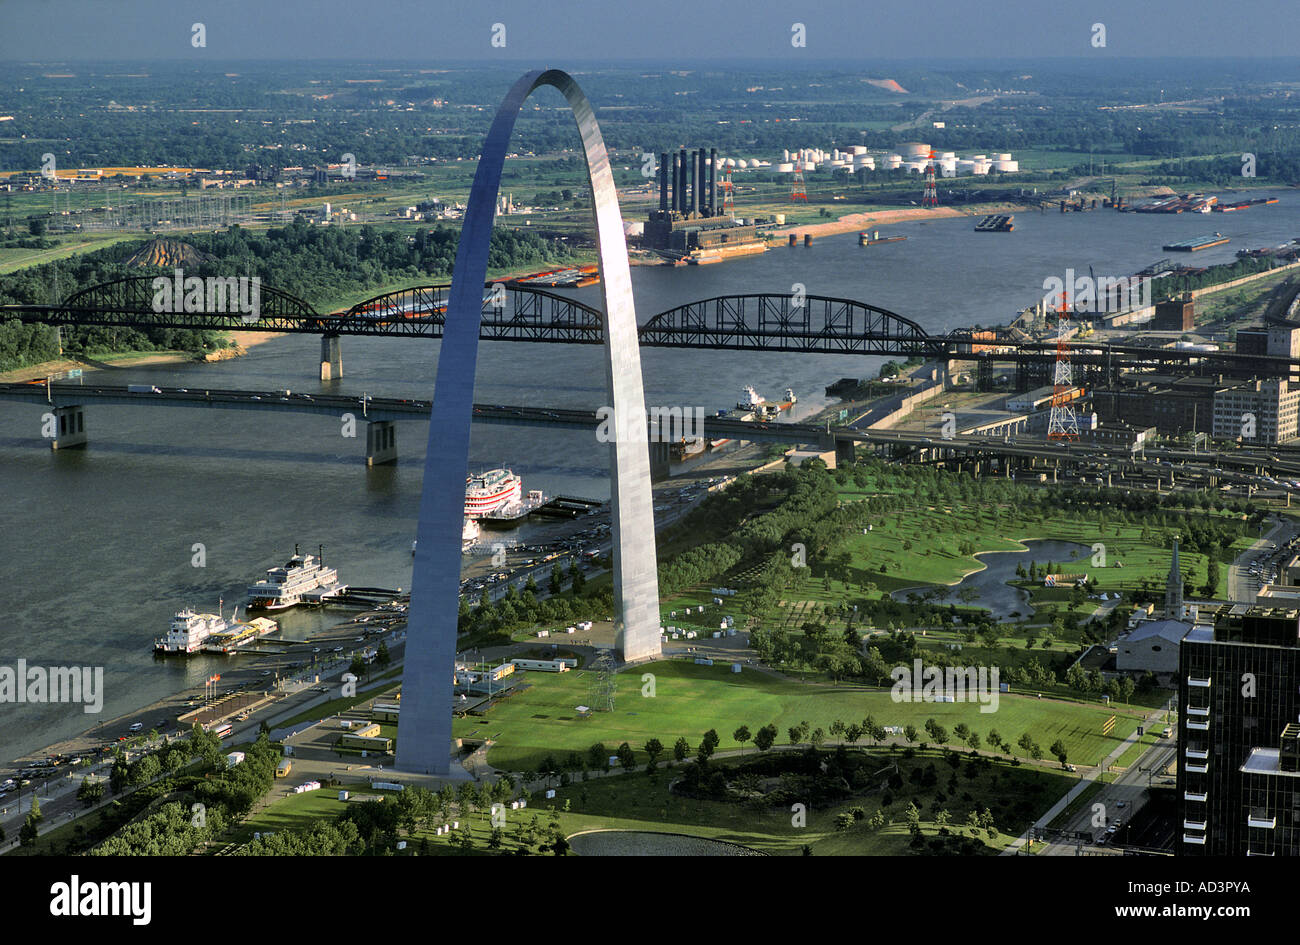 The Saint Louis Arch On the Mississippi River St Louis Missouri Stock Photo